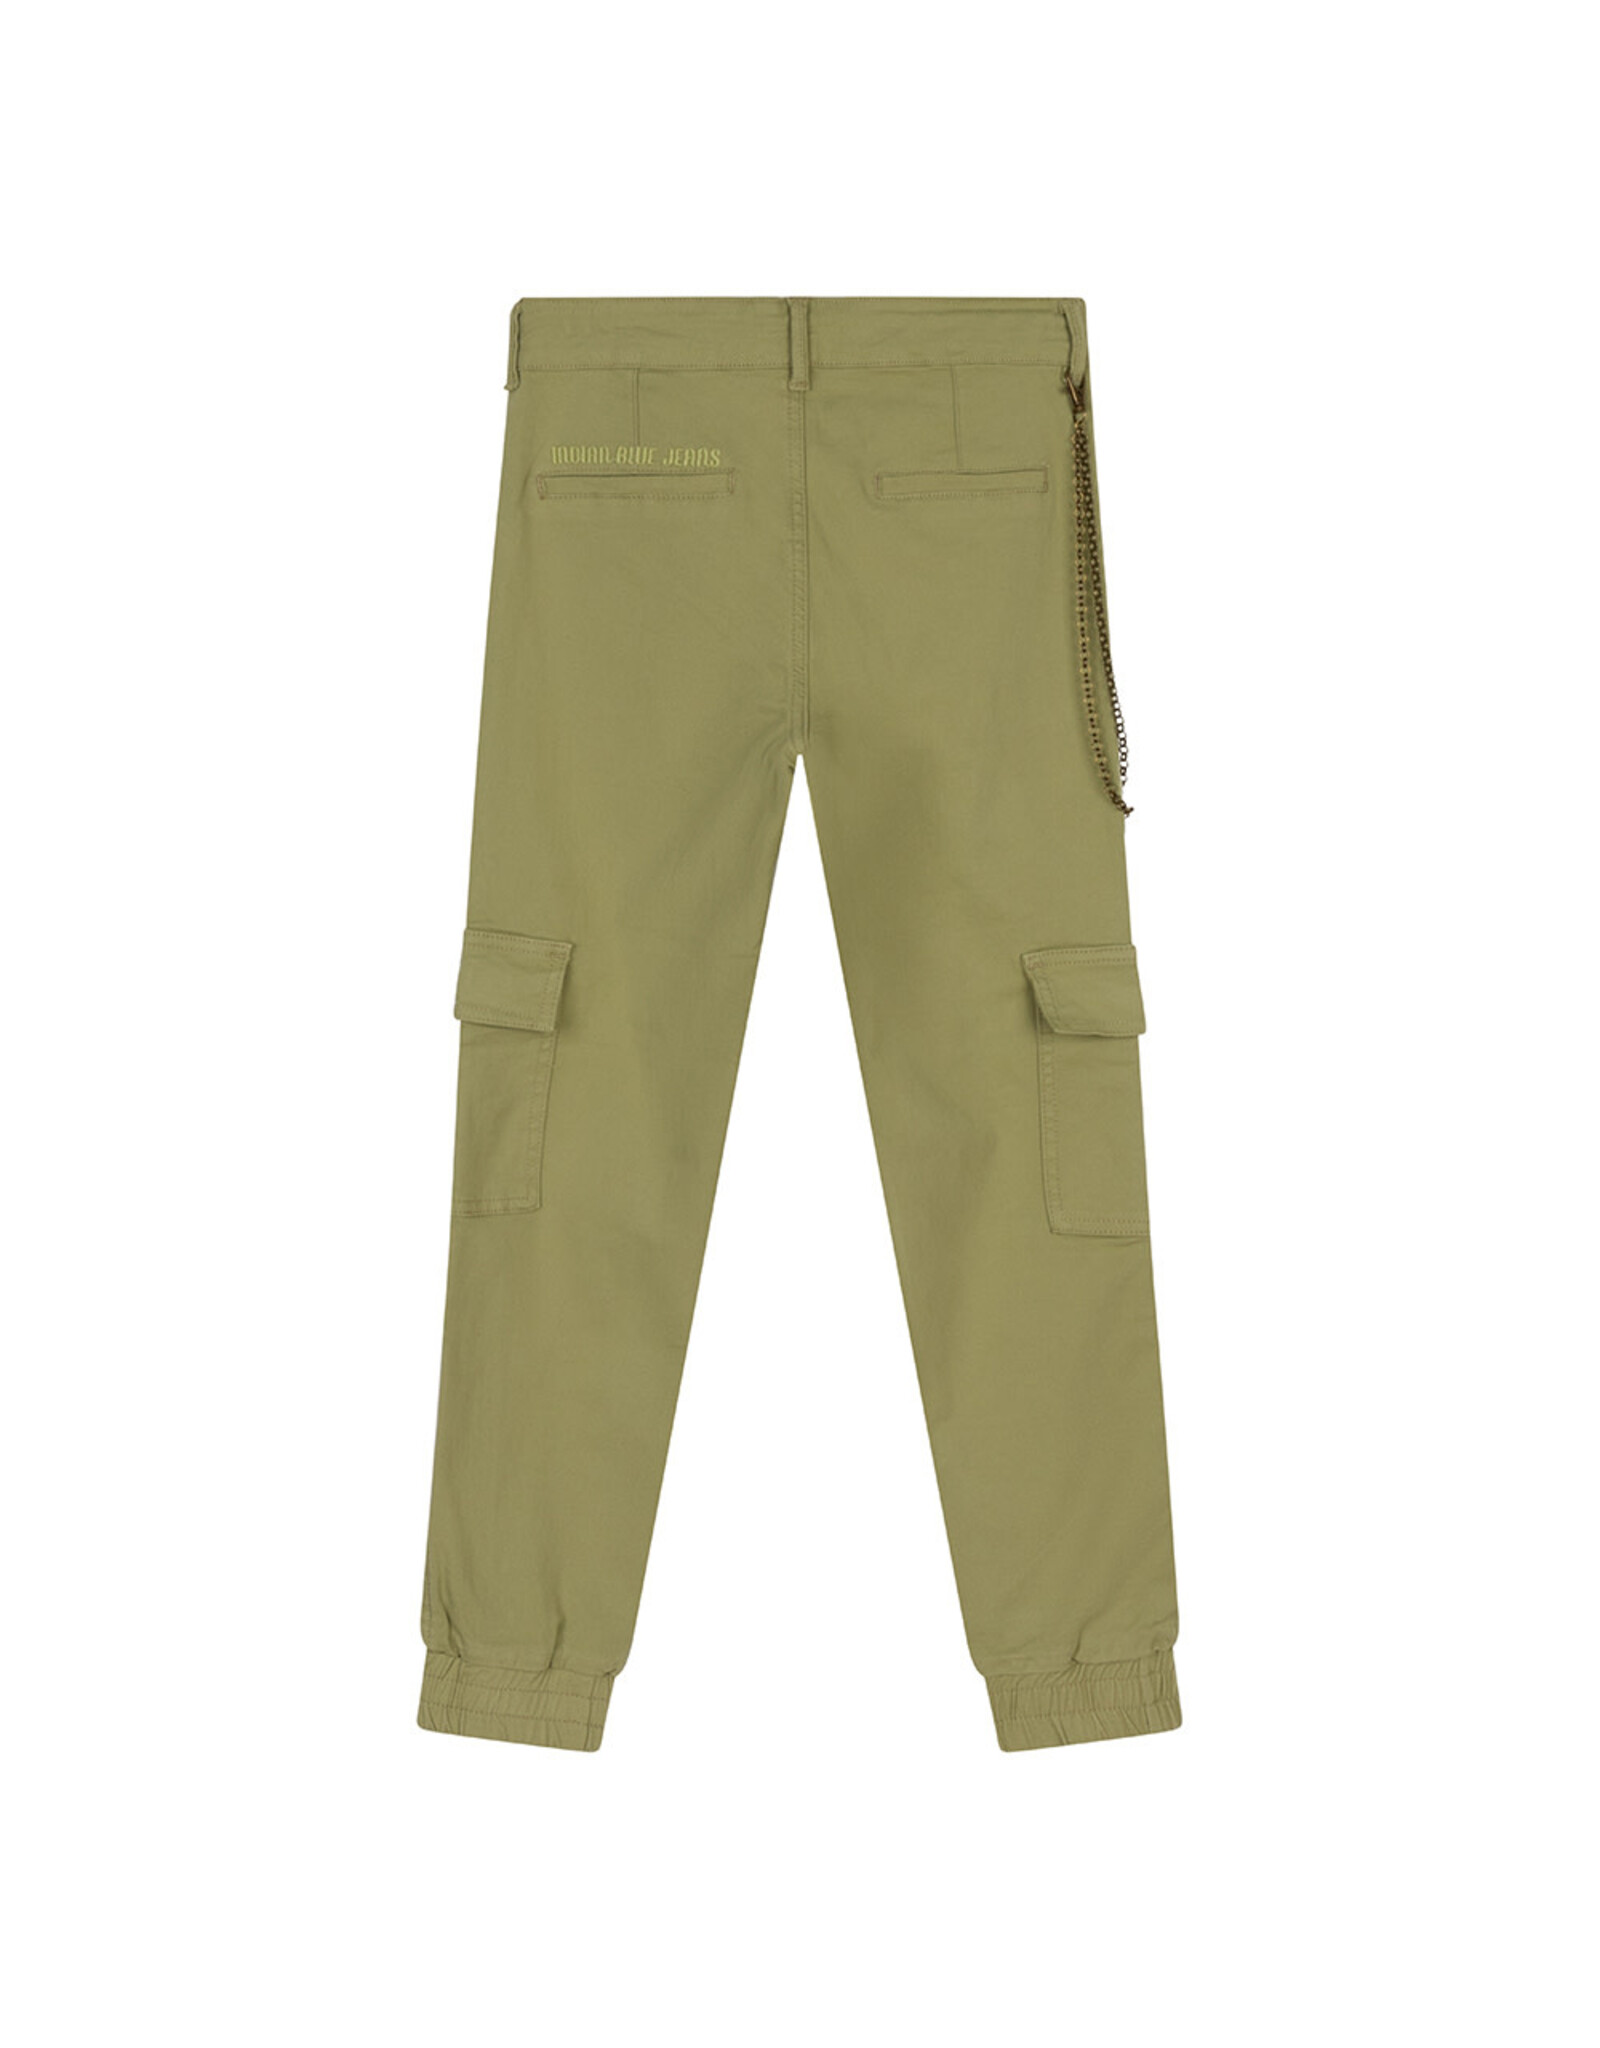 Indian Blue Jeans Cargo Worker Fit Olive